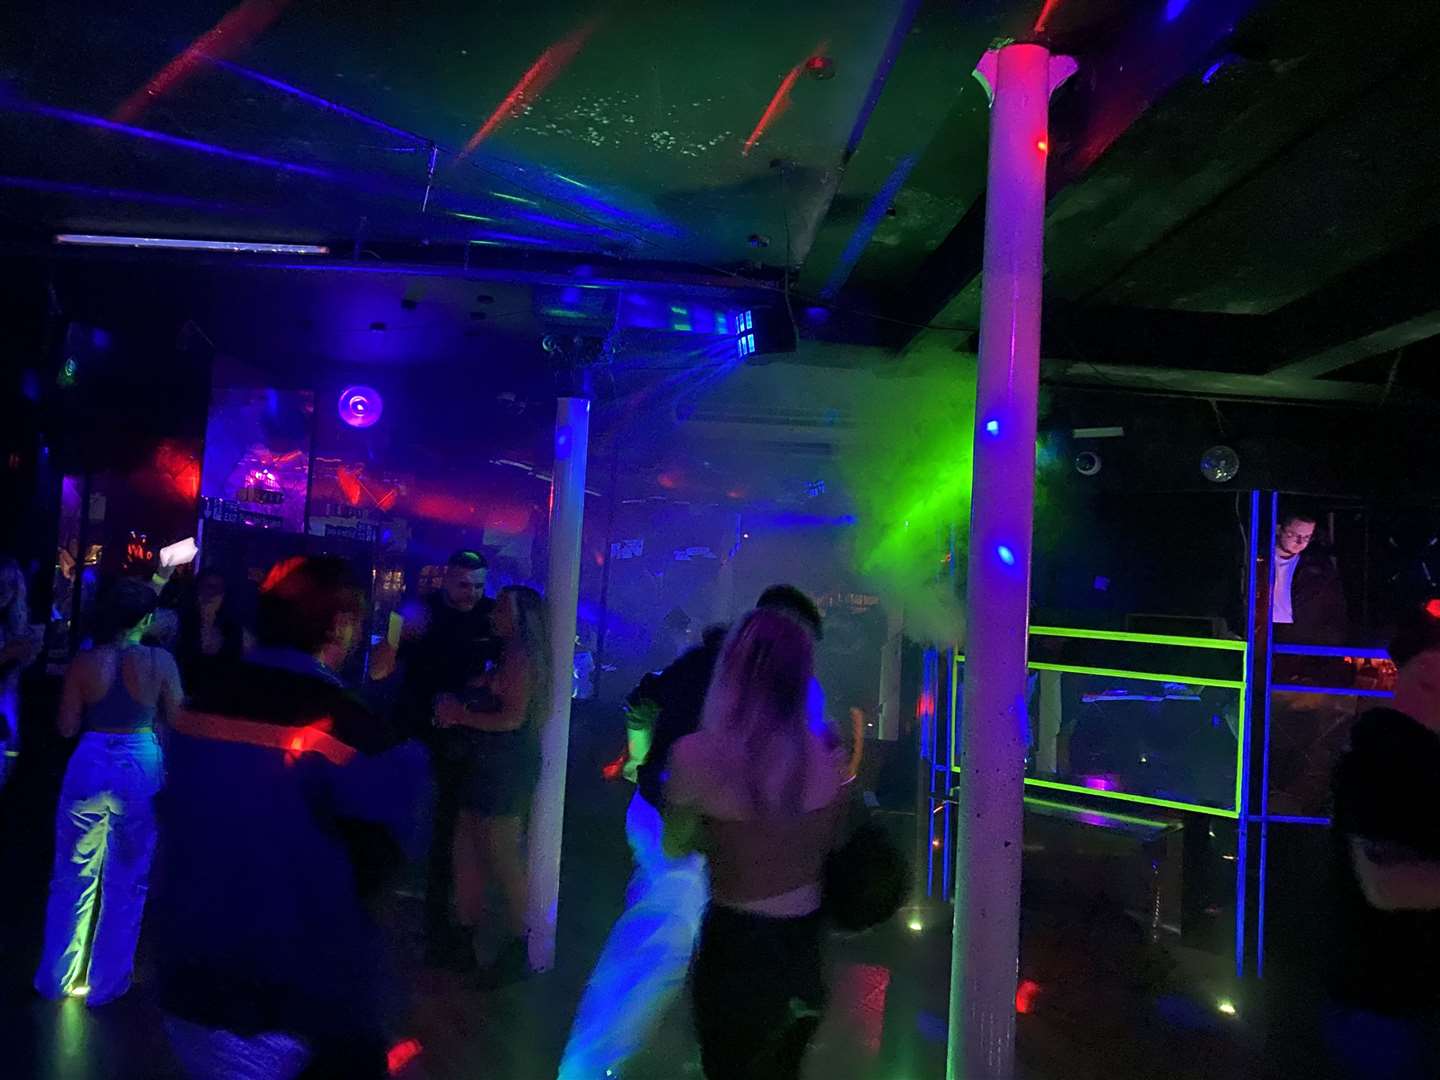 The well-hidden second room opened up to allow more rave-minded people to have fun